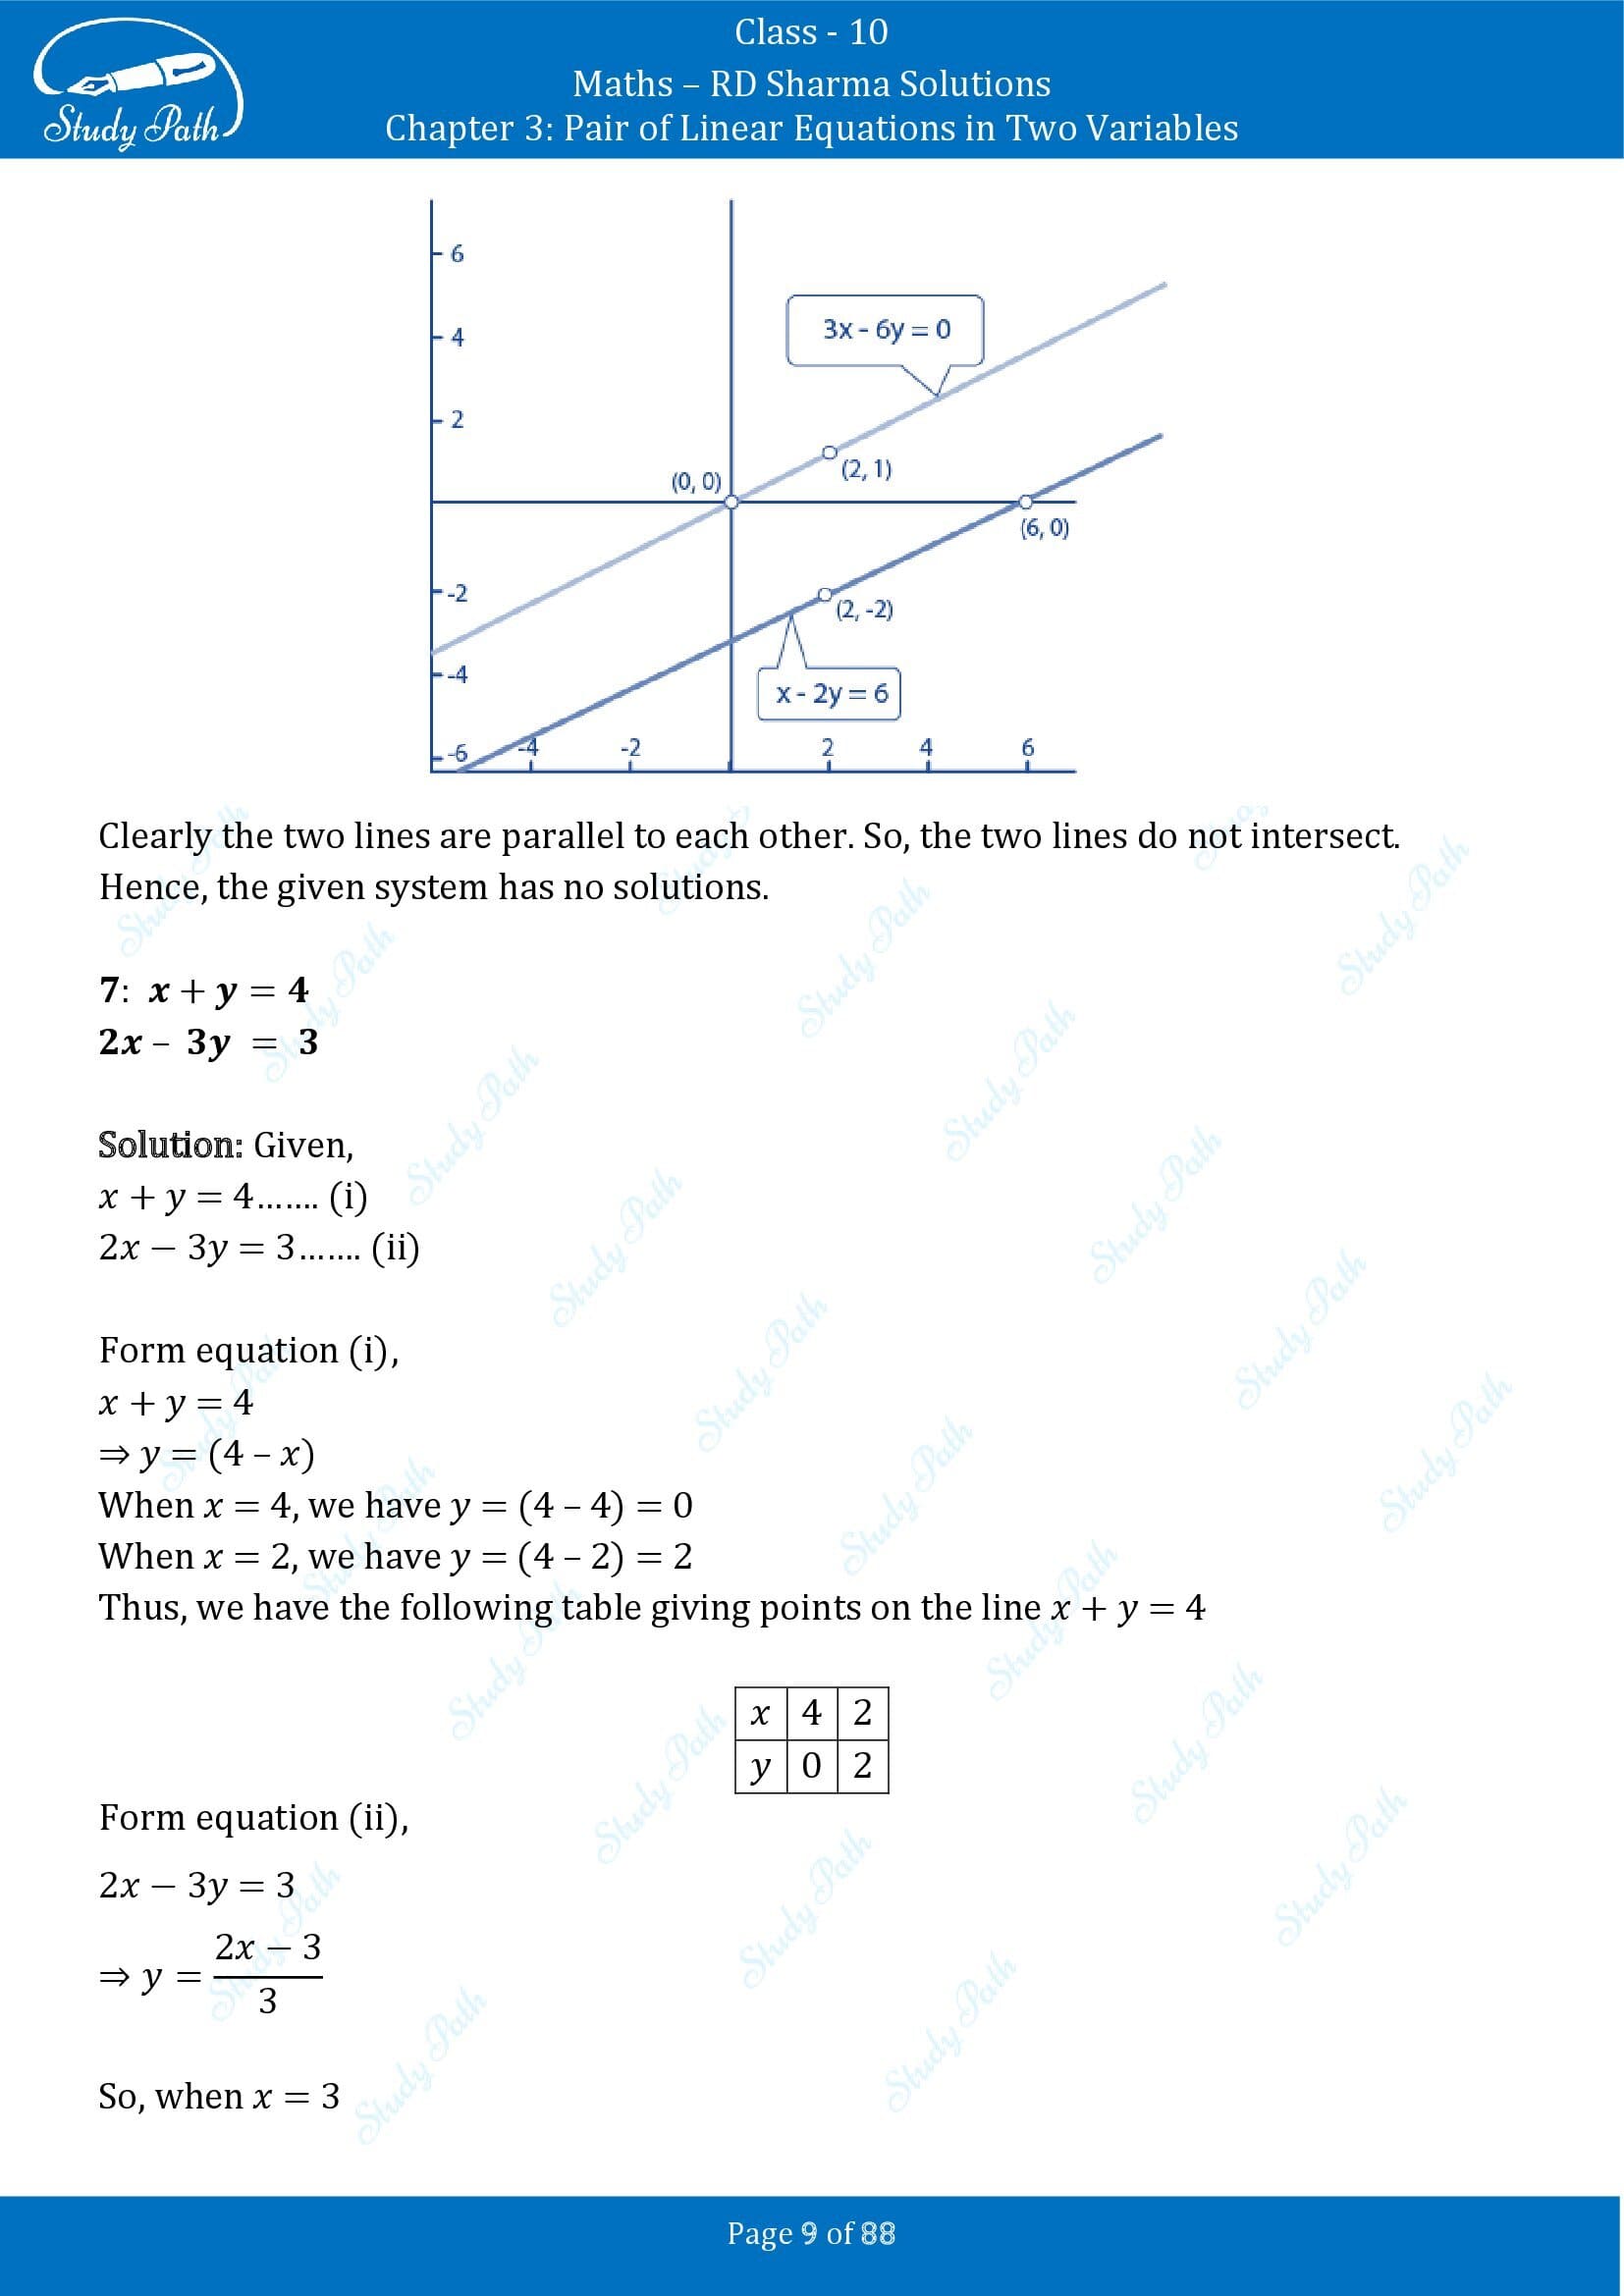 RD Sharma Solutions Class 10 Chapter 3 Pair of Linear Equations in Two Variables Exercise 3.2 00009